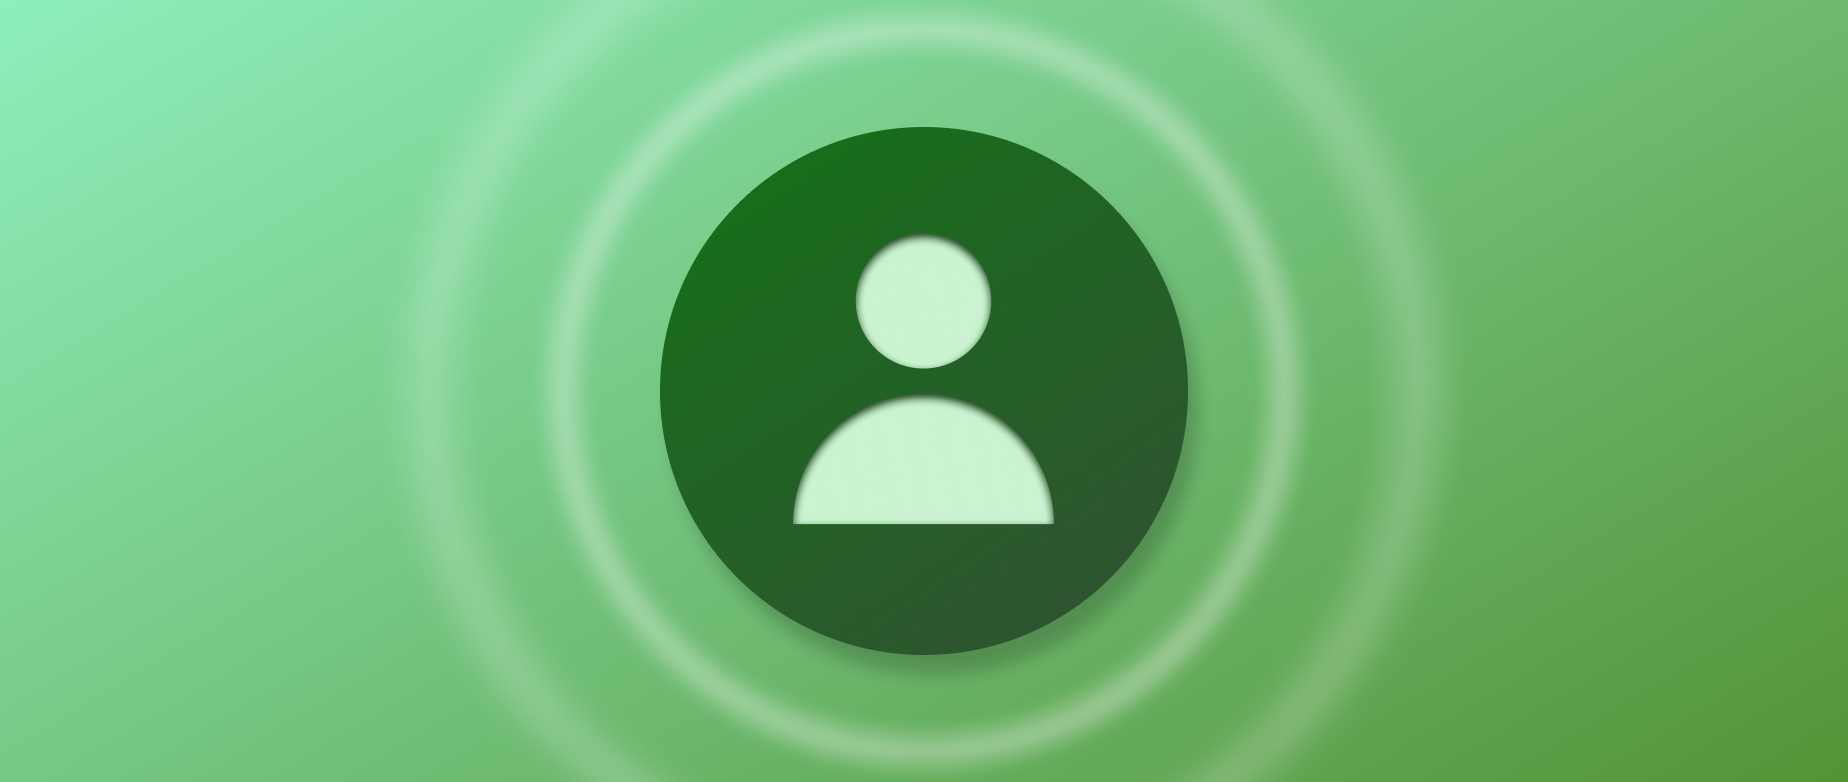 a person icon on green background representing CRM integration